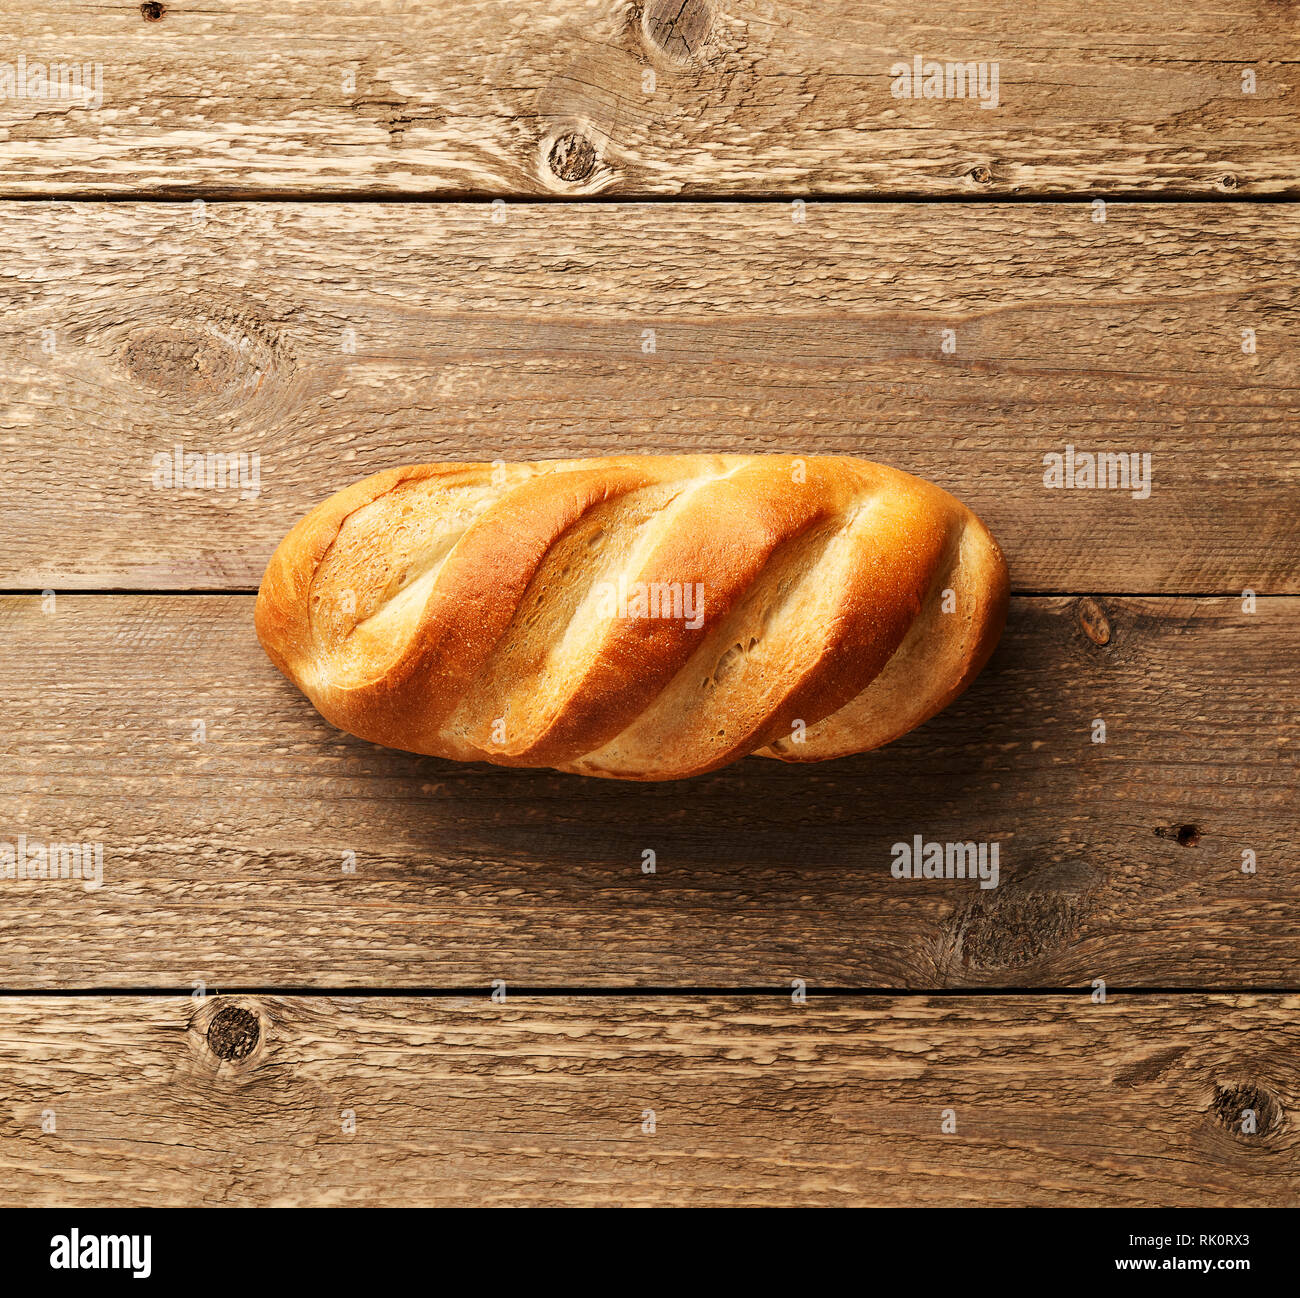 White bread. Bakery concept. Loaf on wooden table with empty place for design. Top view. Stock Photo